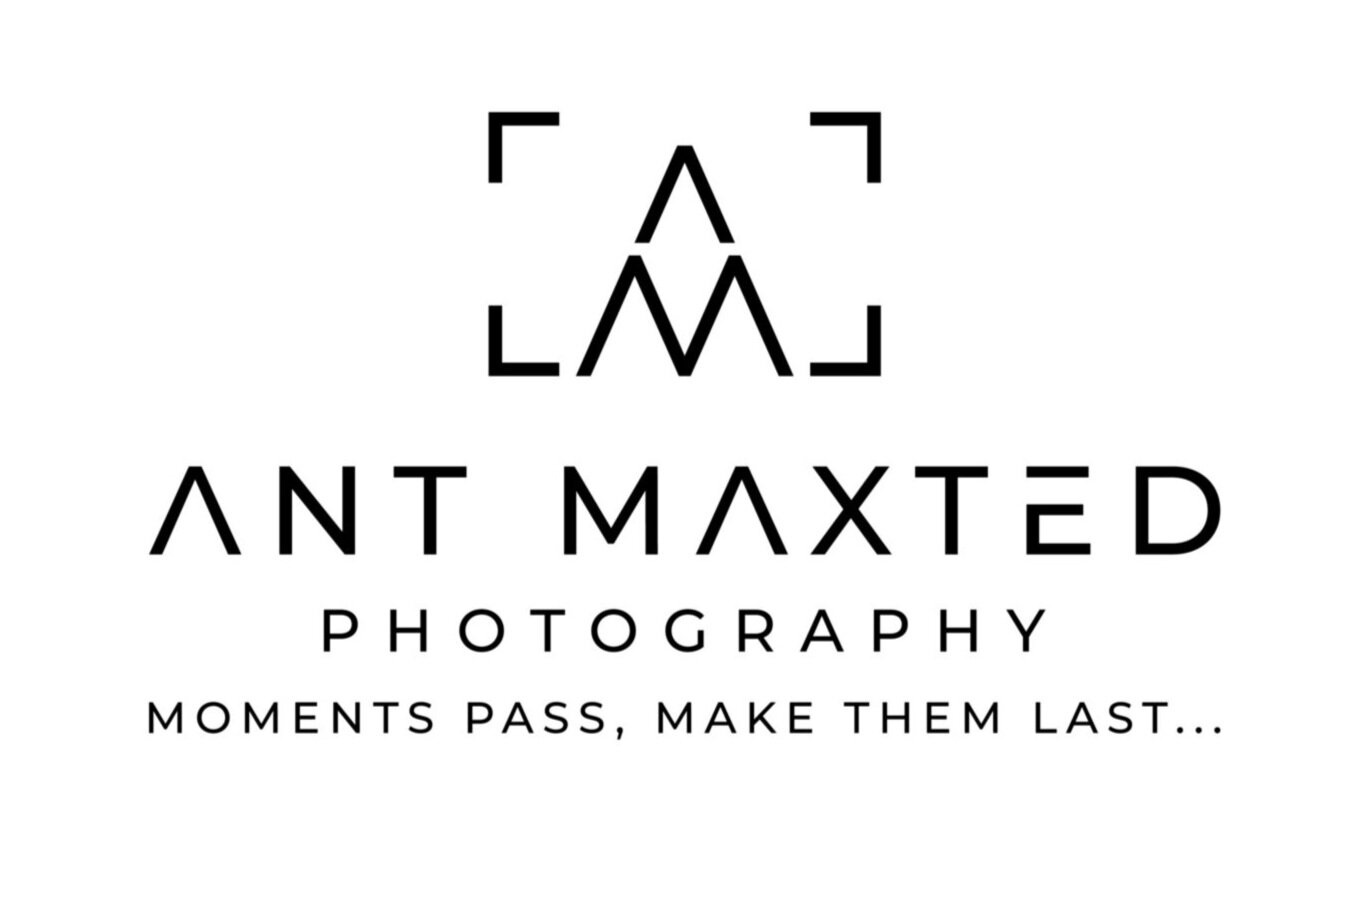 Ant Maxted Photography